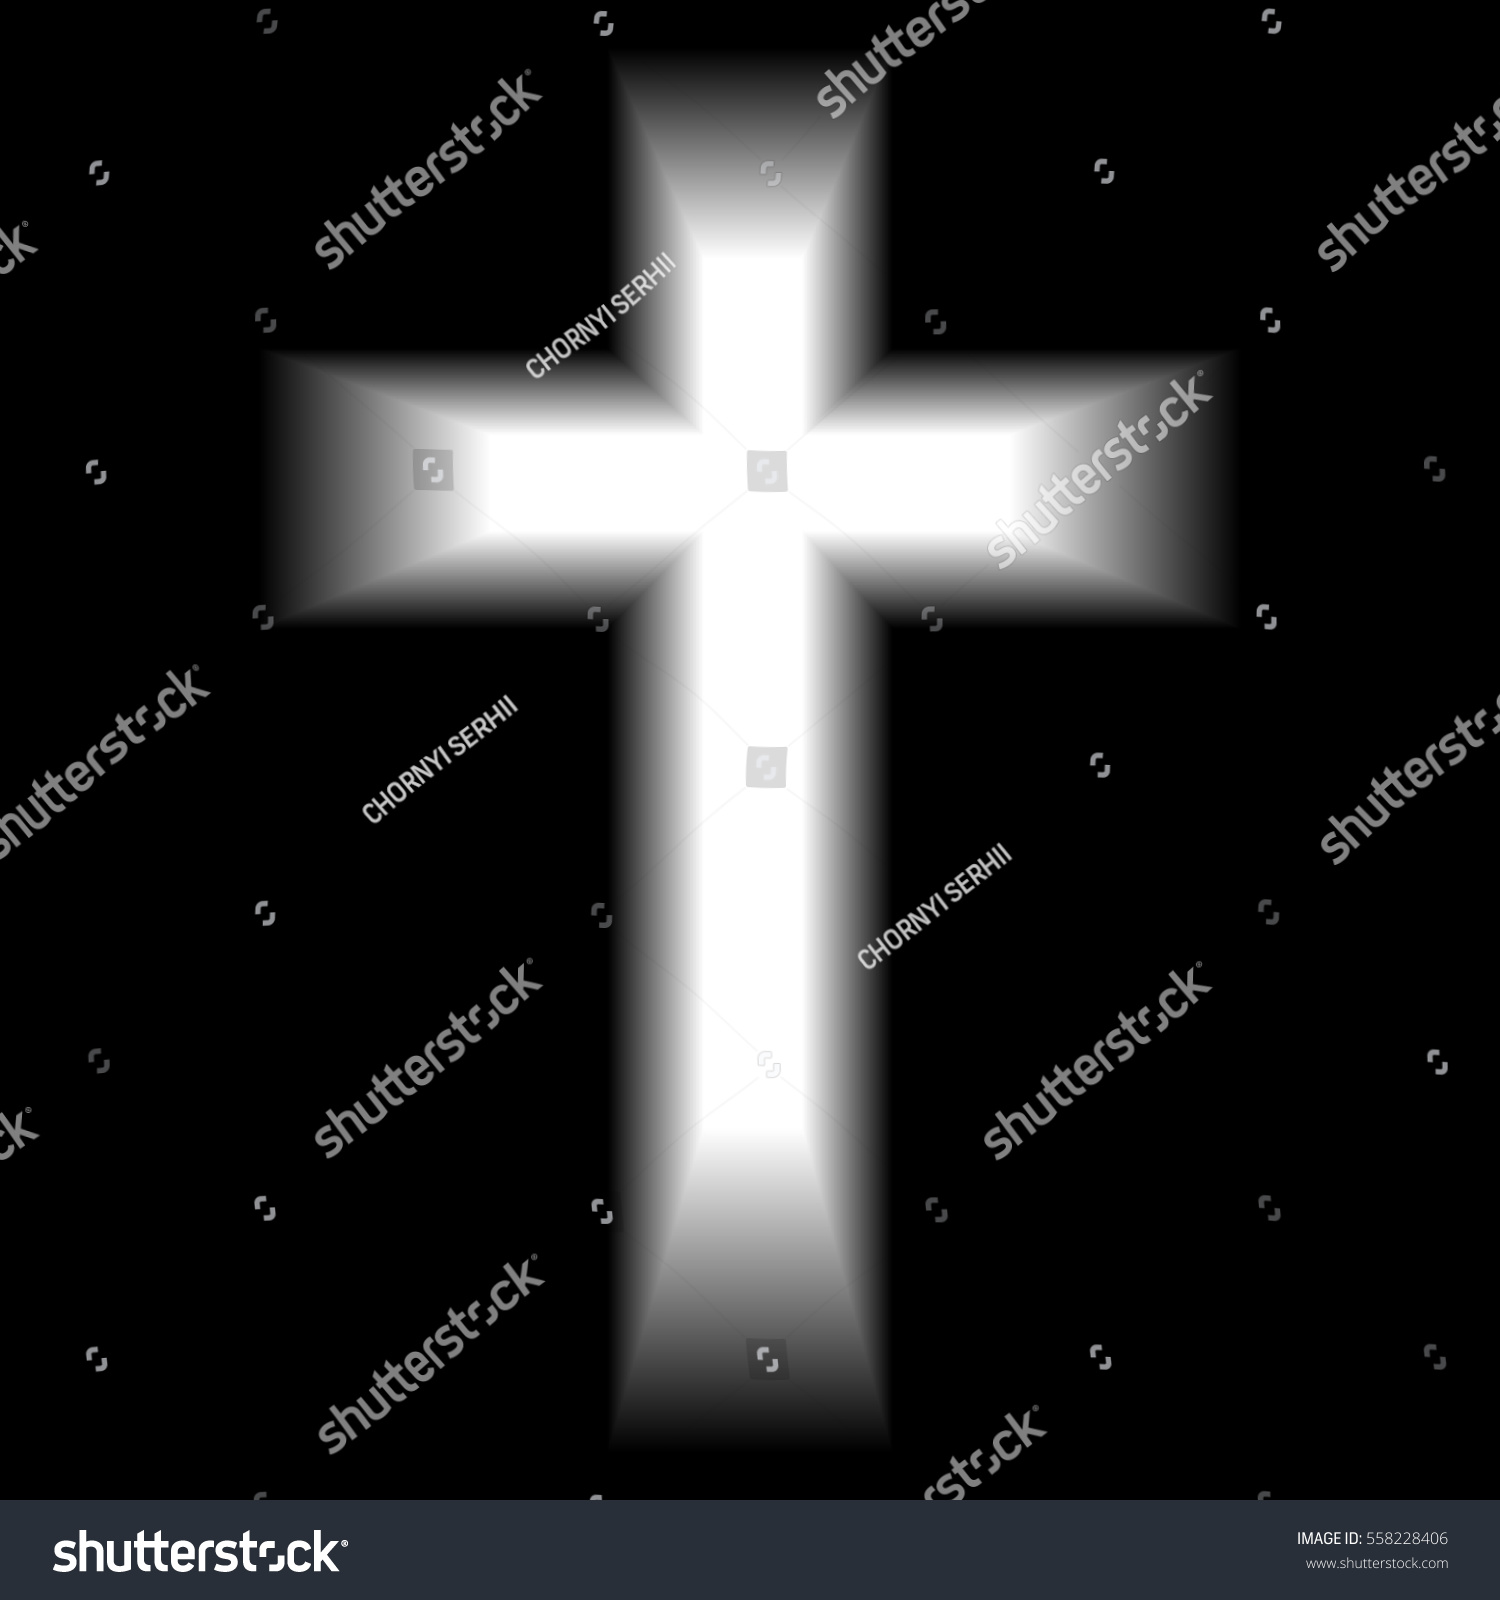 Abstract cross. Abstract background. gradient. #558228406